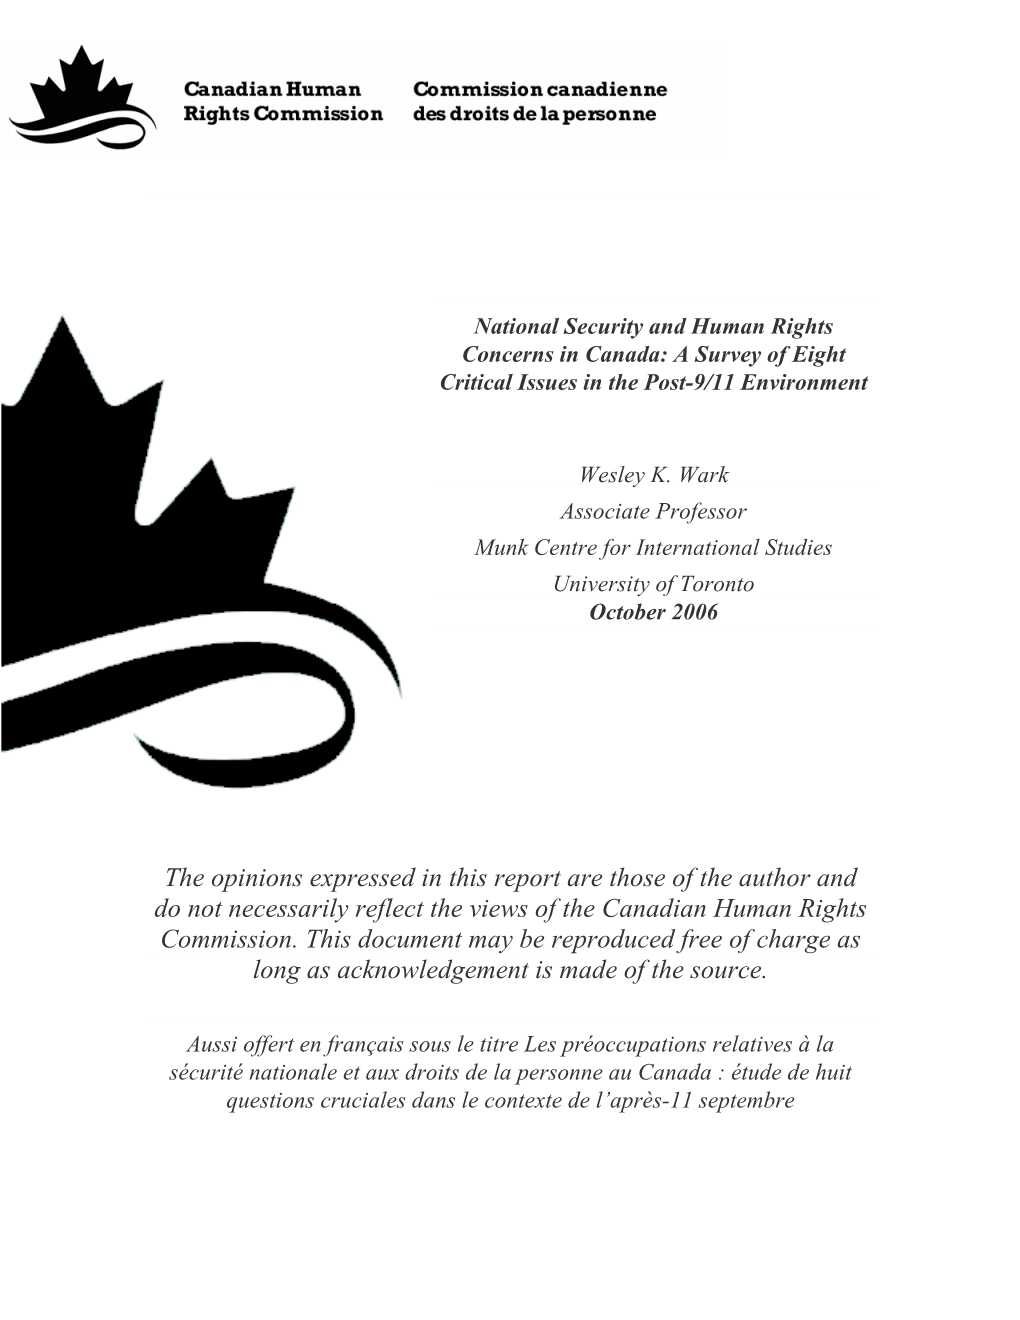 National Security and Human Rights Concerns in Canada: a Survey of Eight Critical Issues in the Post-9/11 Environment